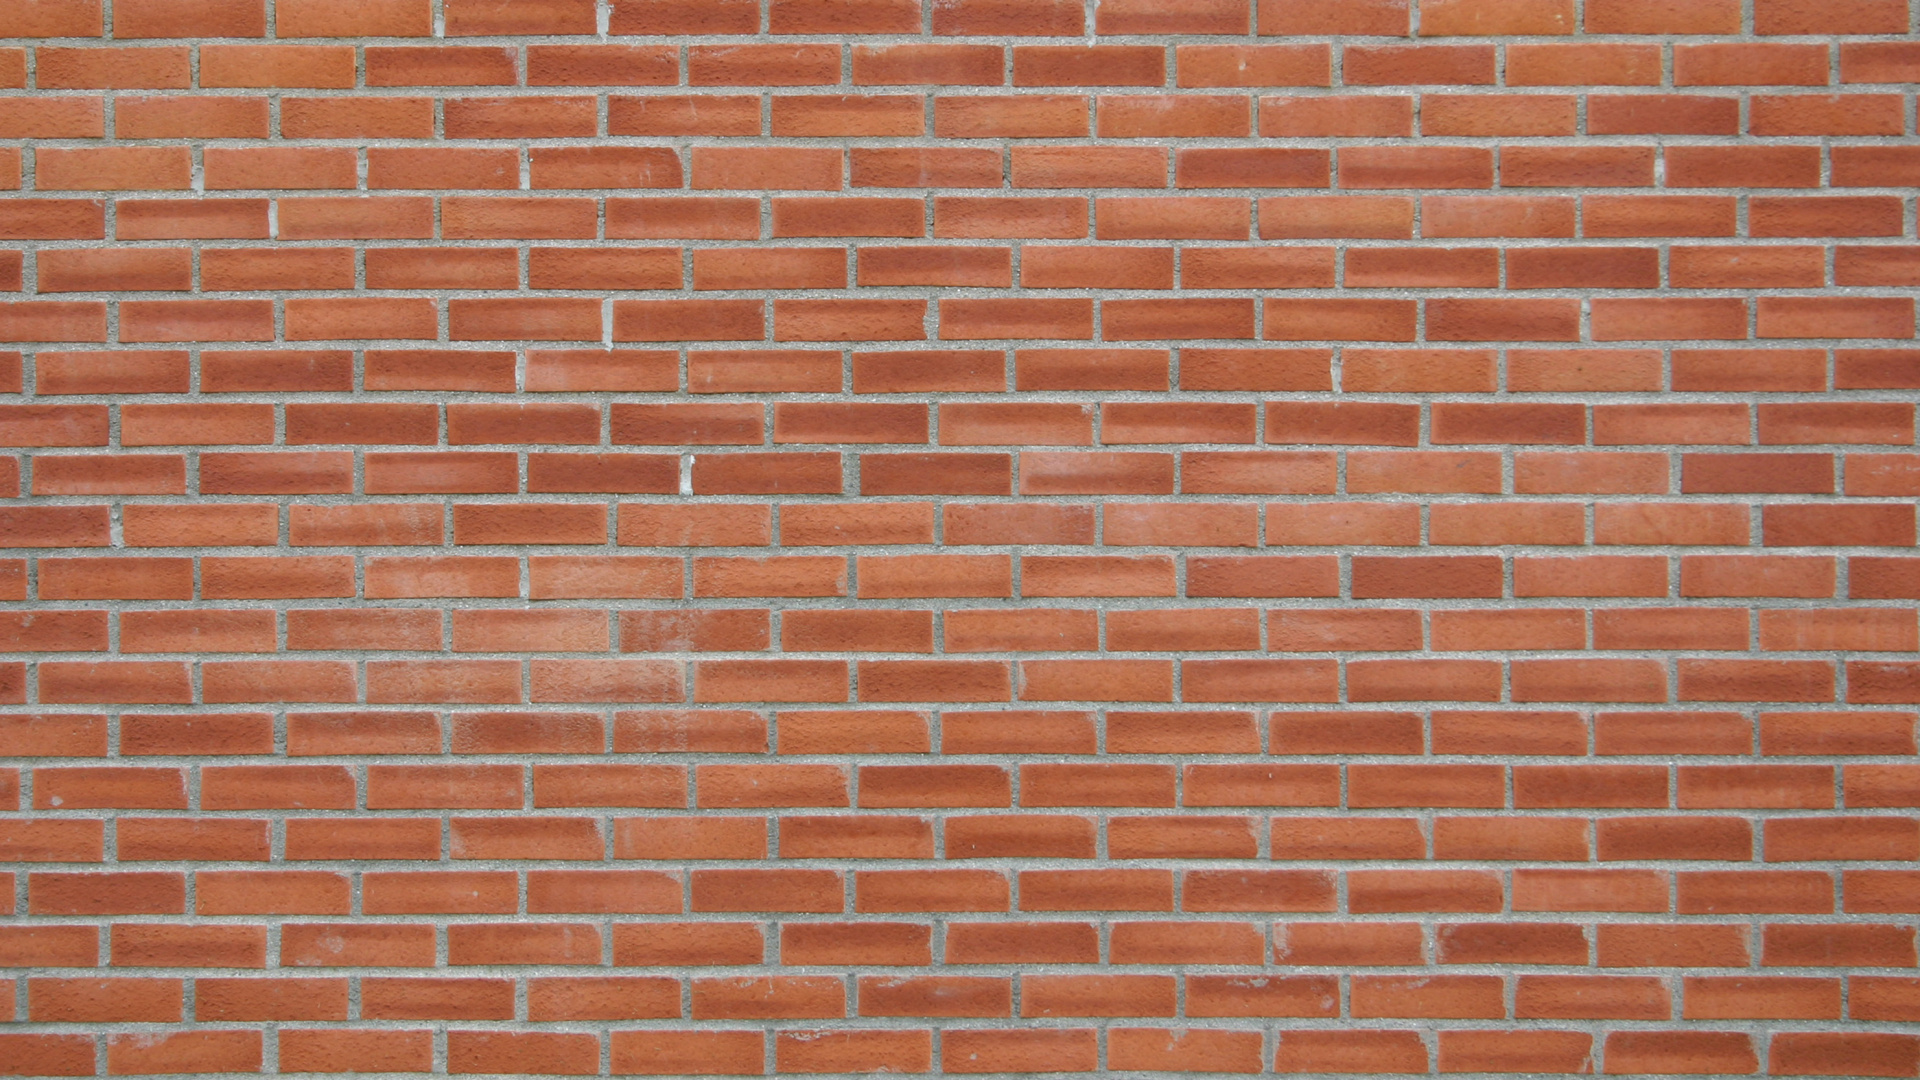 Red Brick Wall During Daytime. Wallpaper in 1920x1080 Resolution